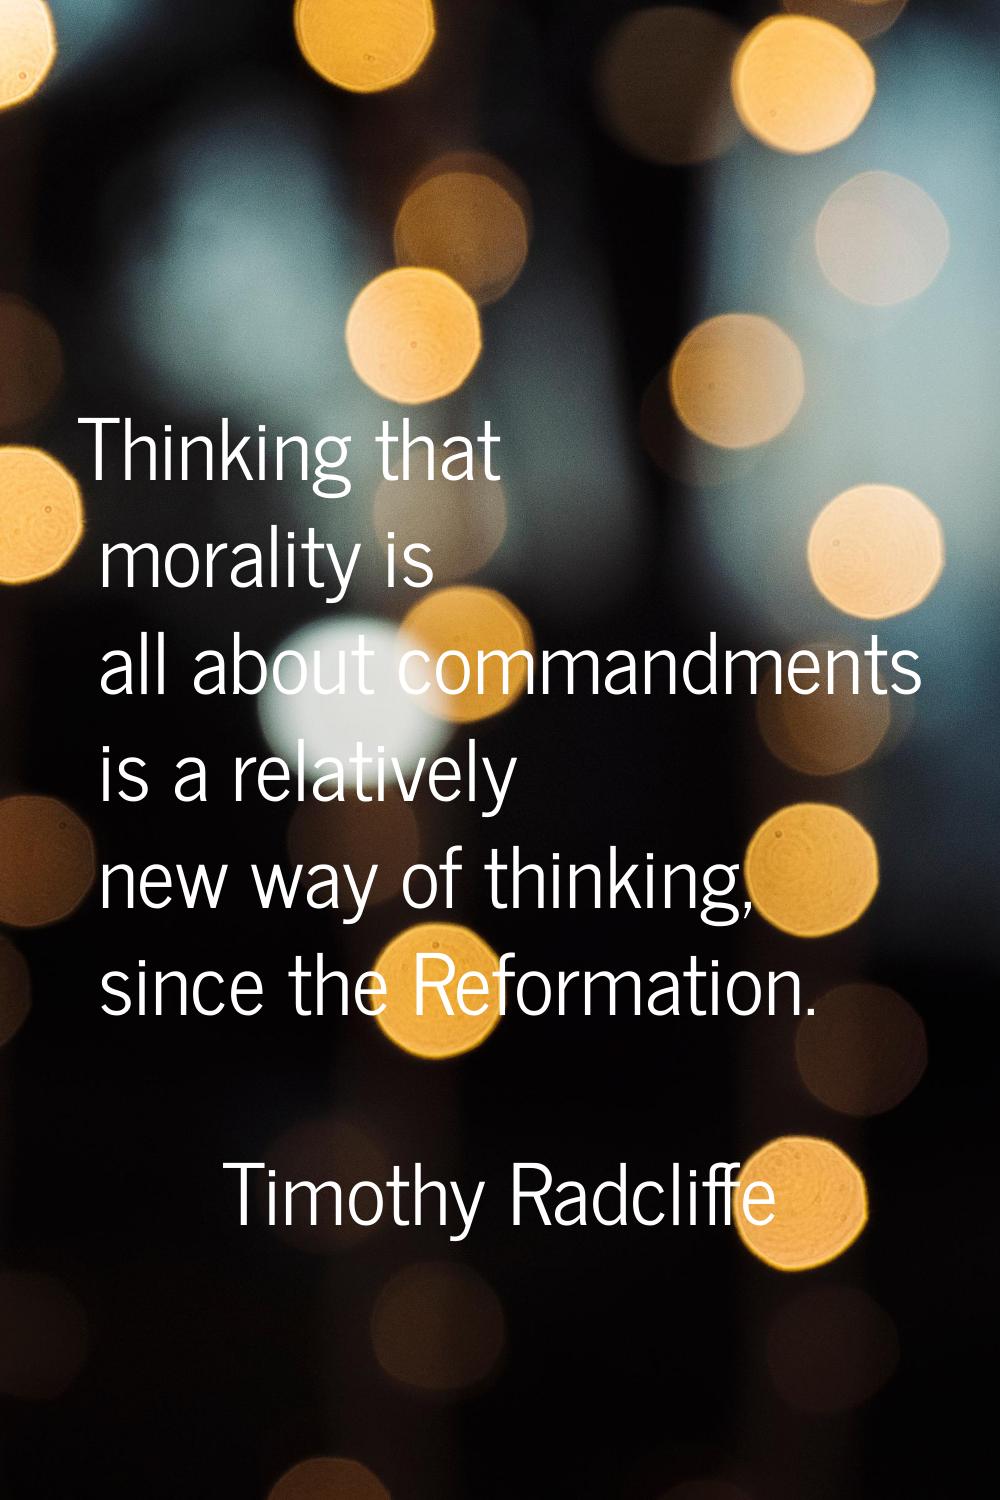 Thinking that morality is all about commandments is a relatively new way of thinking, since the Ref